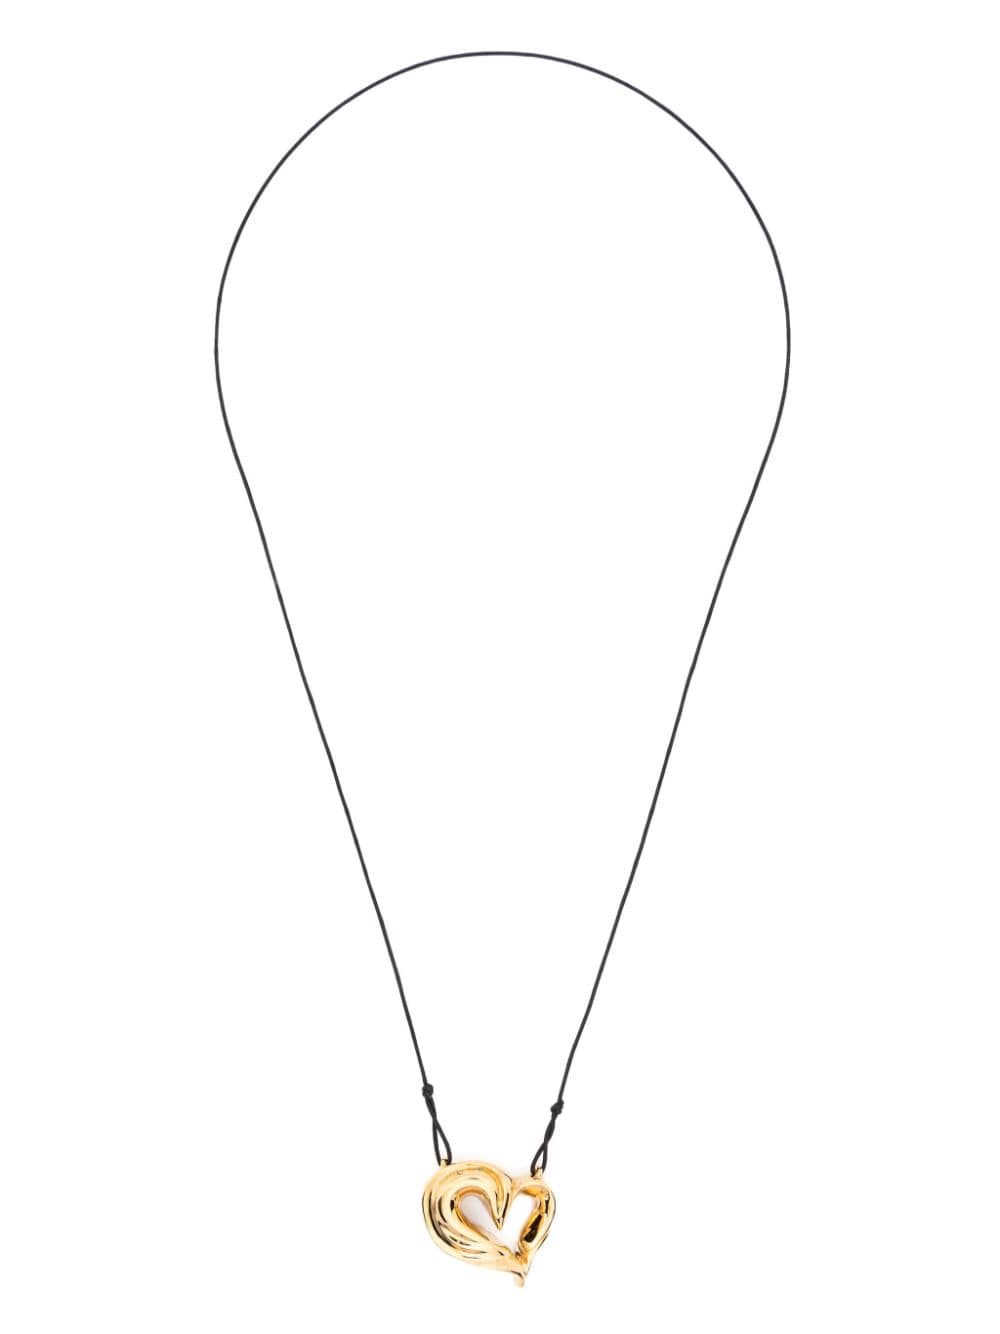 Annelise Michelson Amor Gold-plated Choker